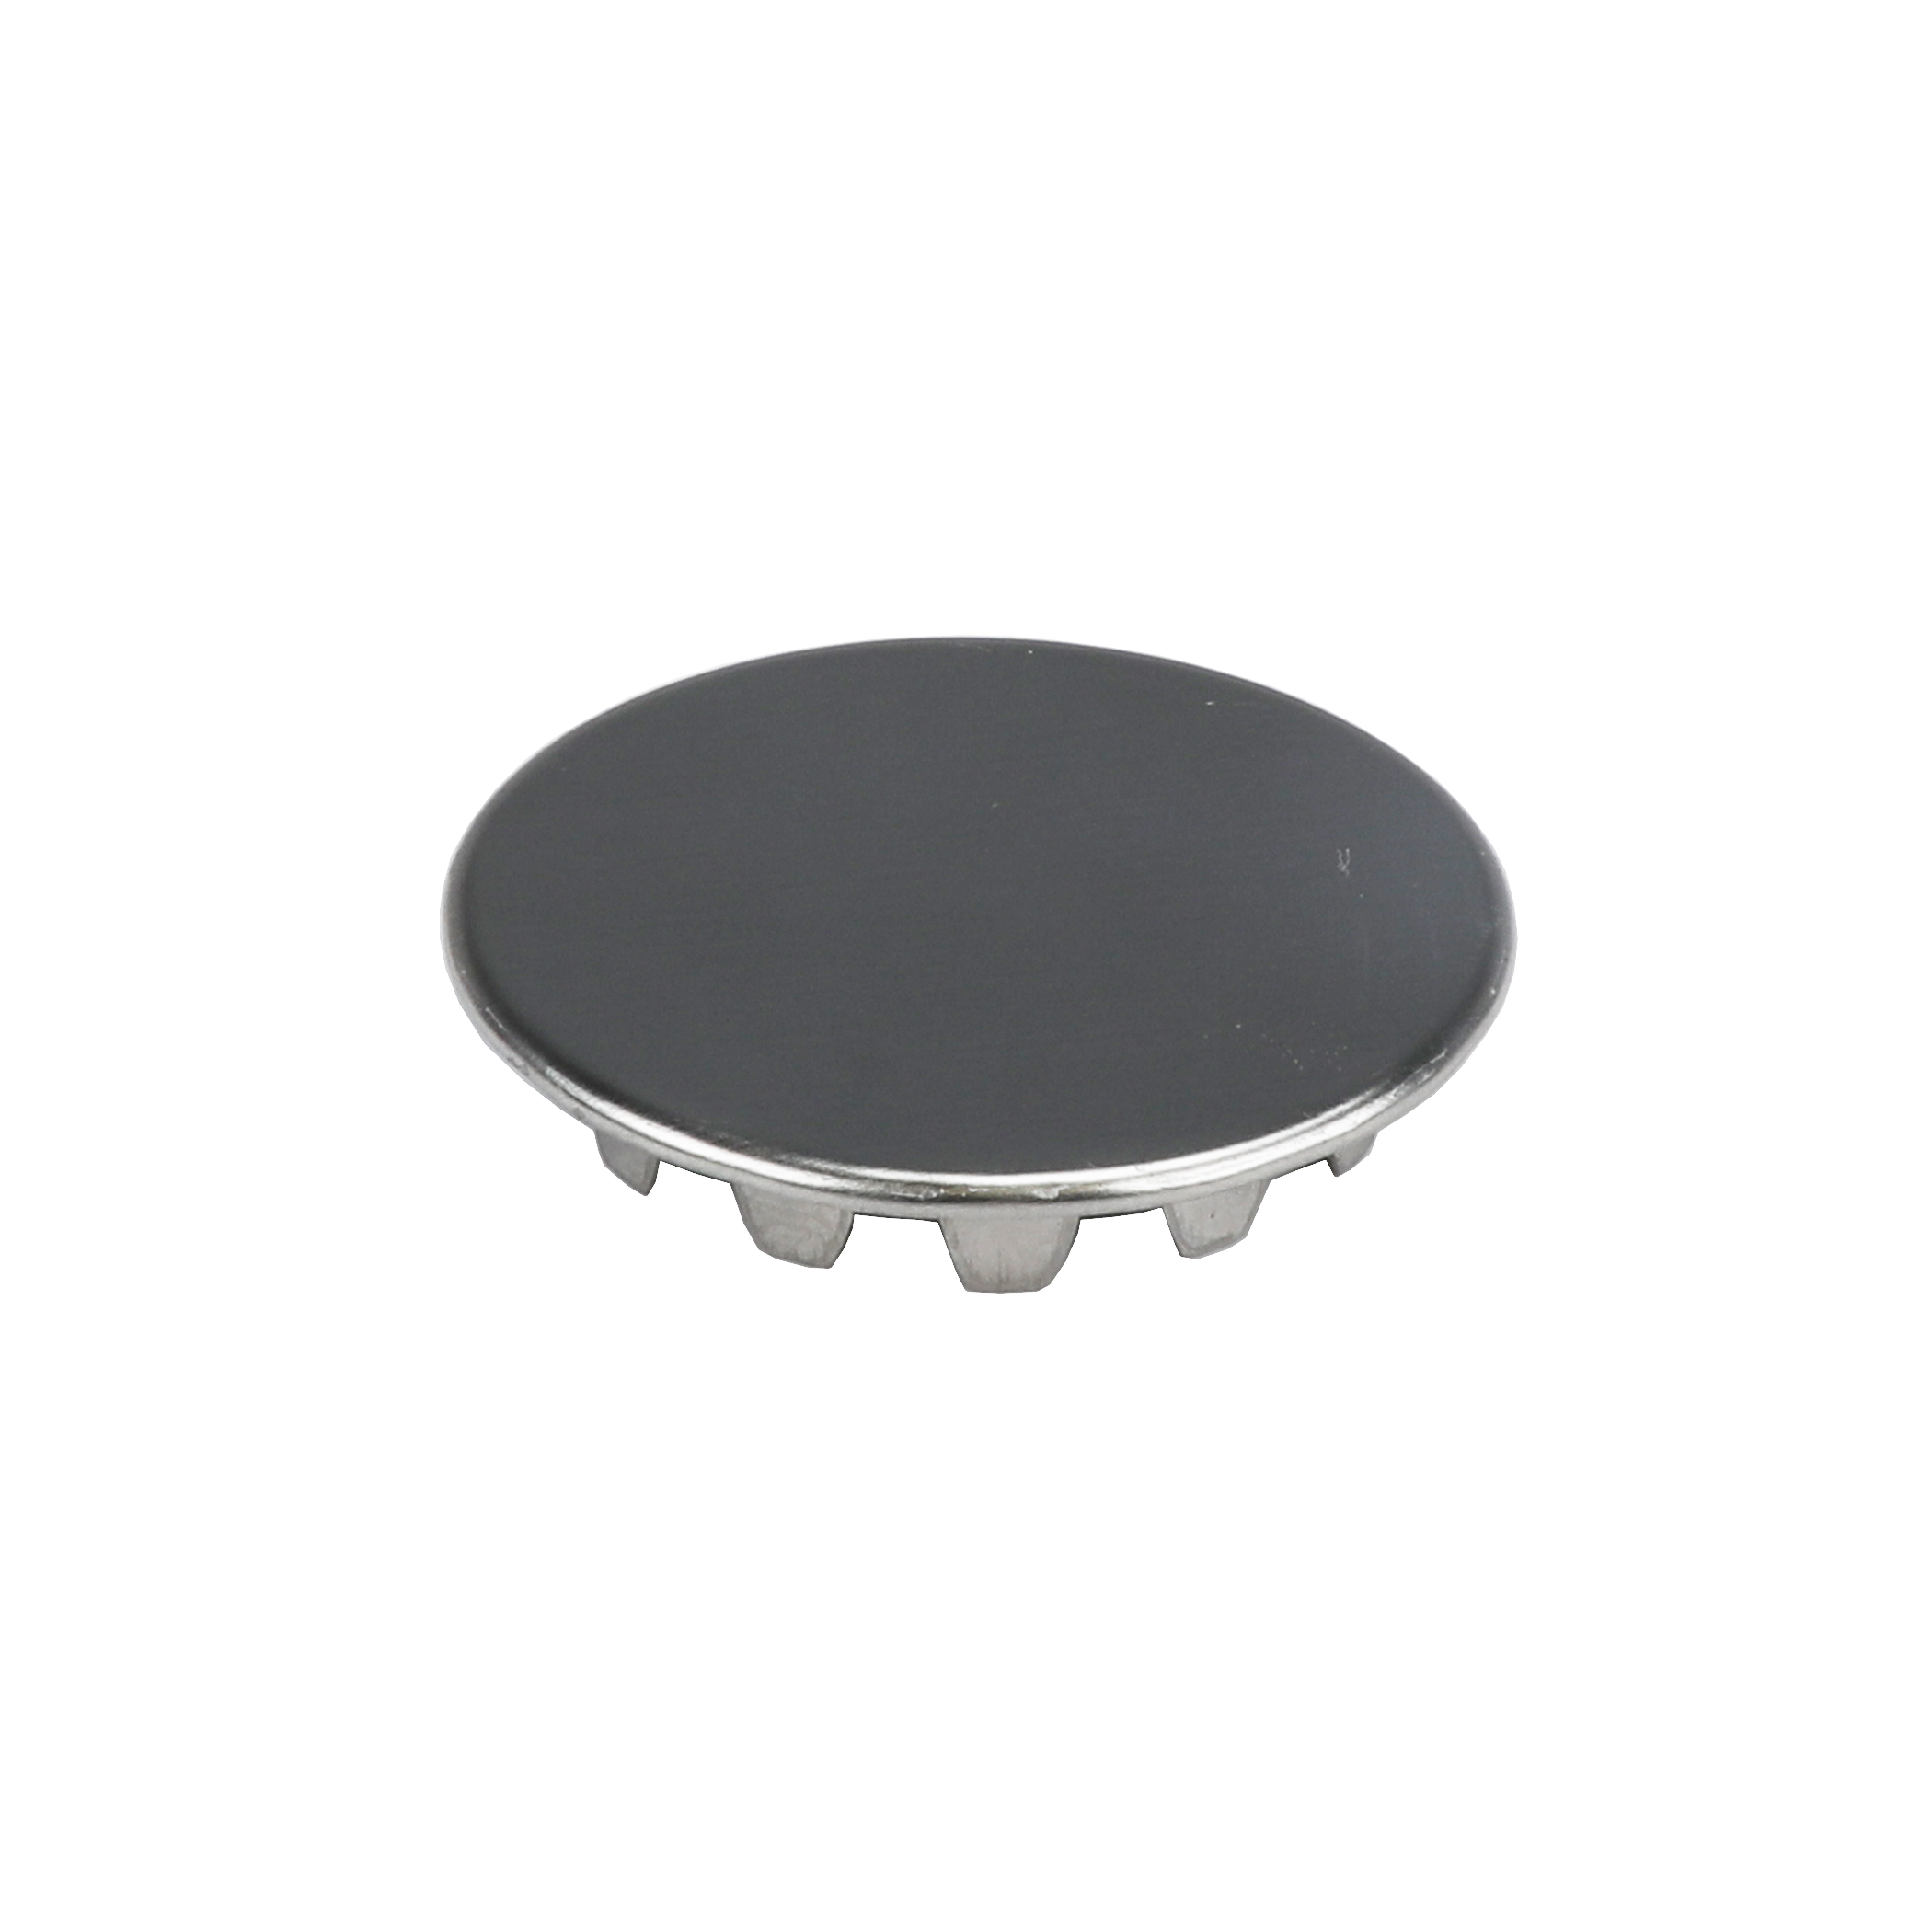 Steel Sink Hole Cover Replacement Part Y4Y9 